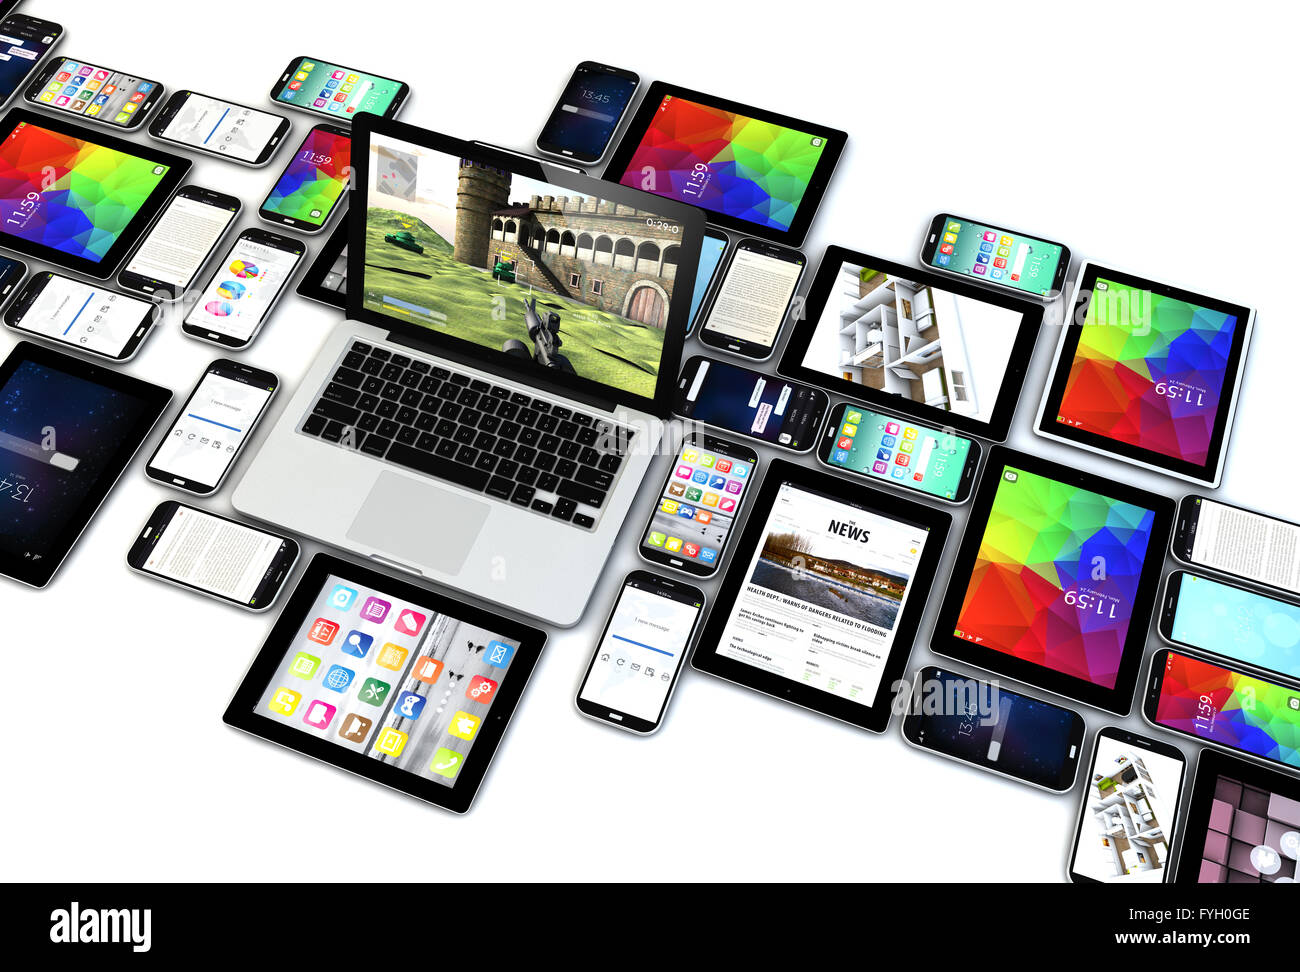 technology concept: devices collection over white background. All screen graphics are made up. Stock Photo